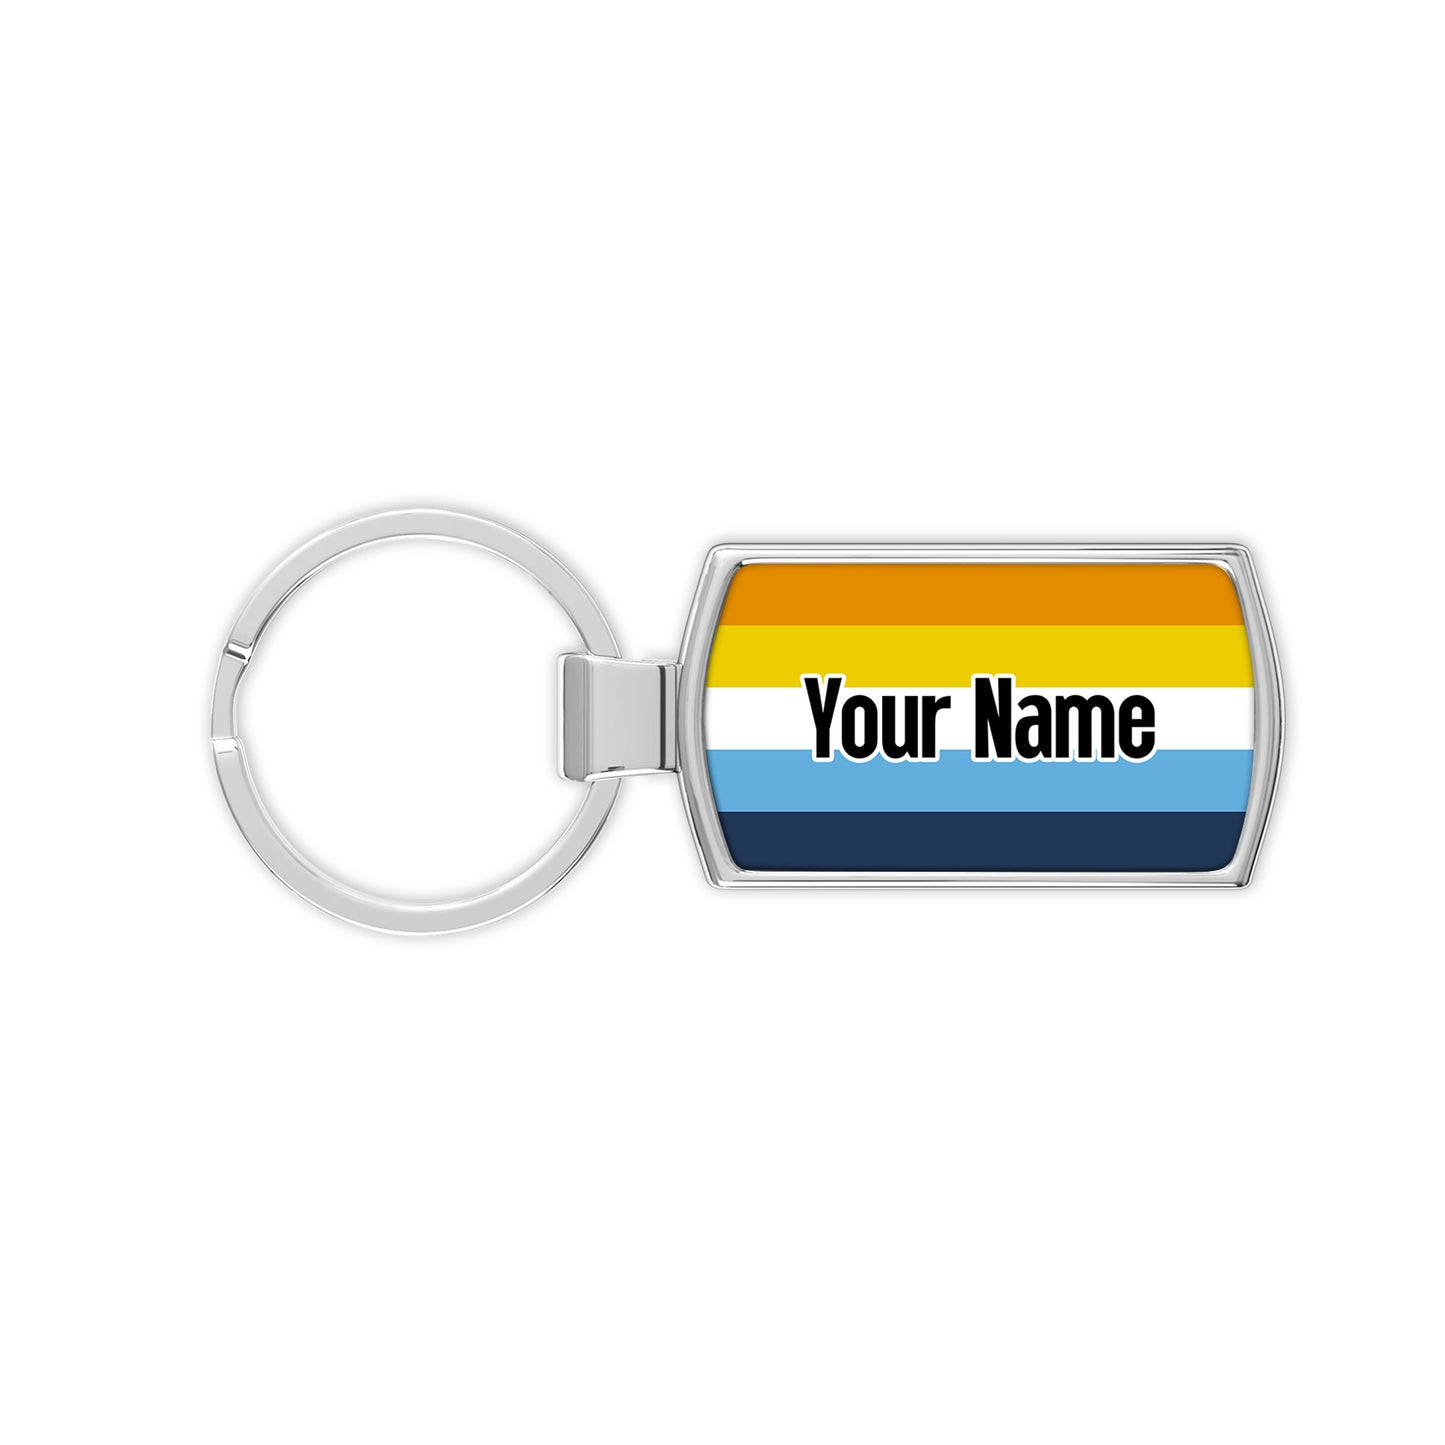 Aroace pride flag metal keyring personalised with your name or pronouns